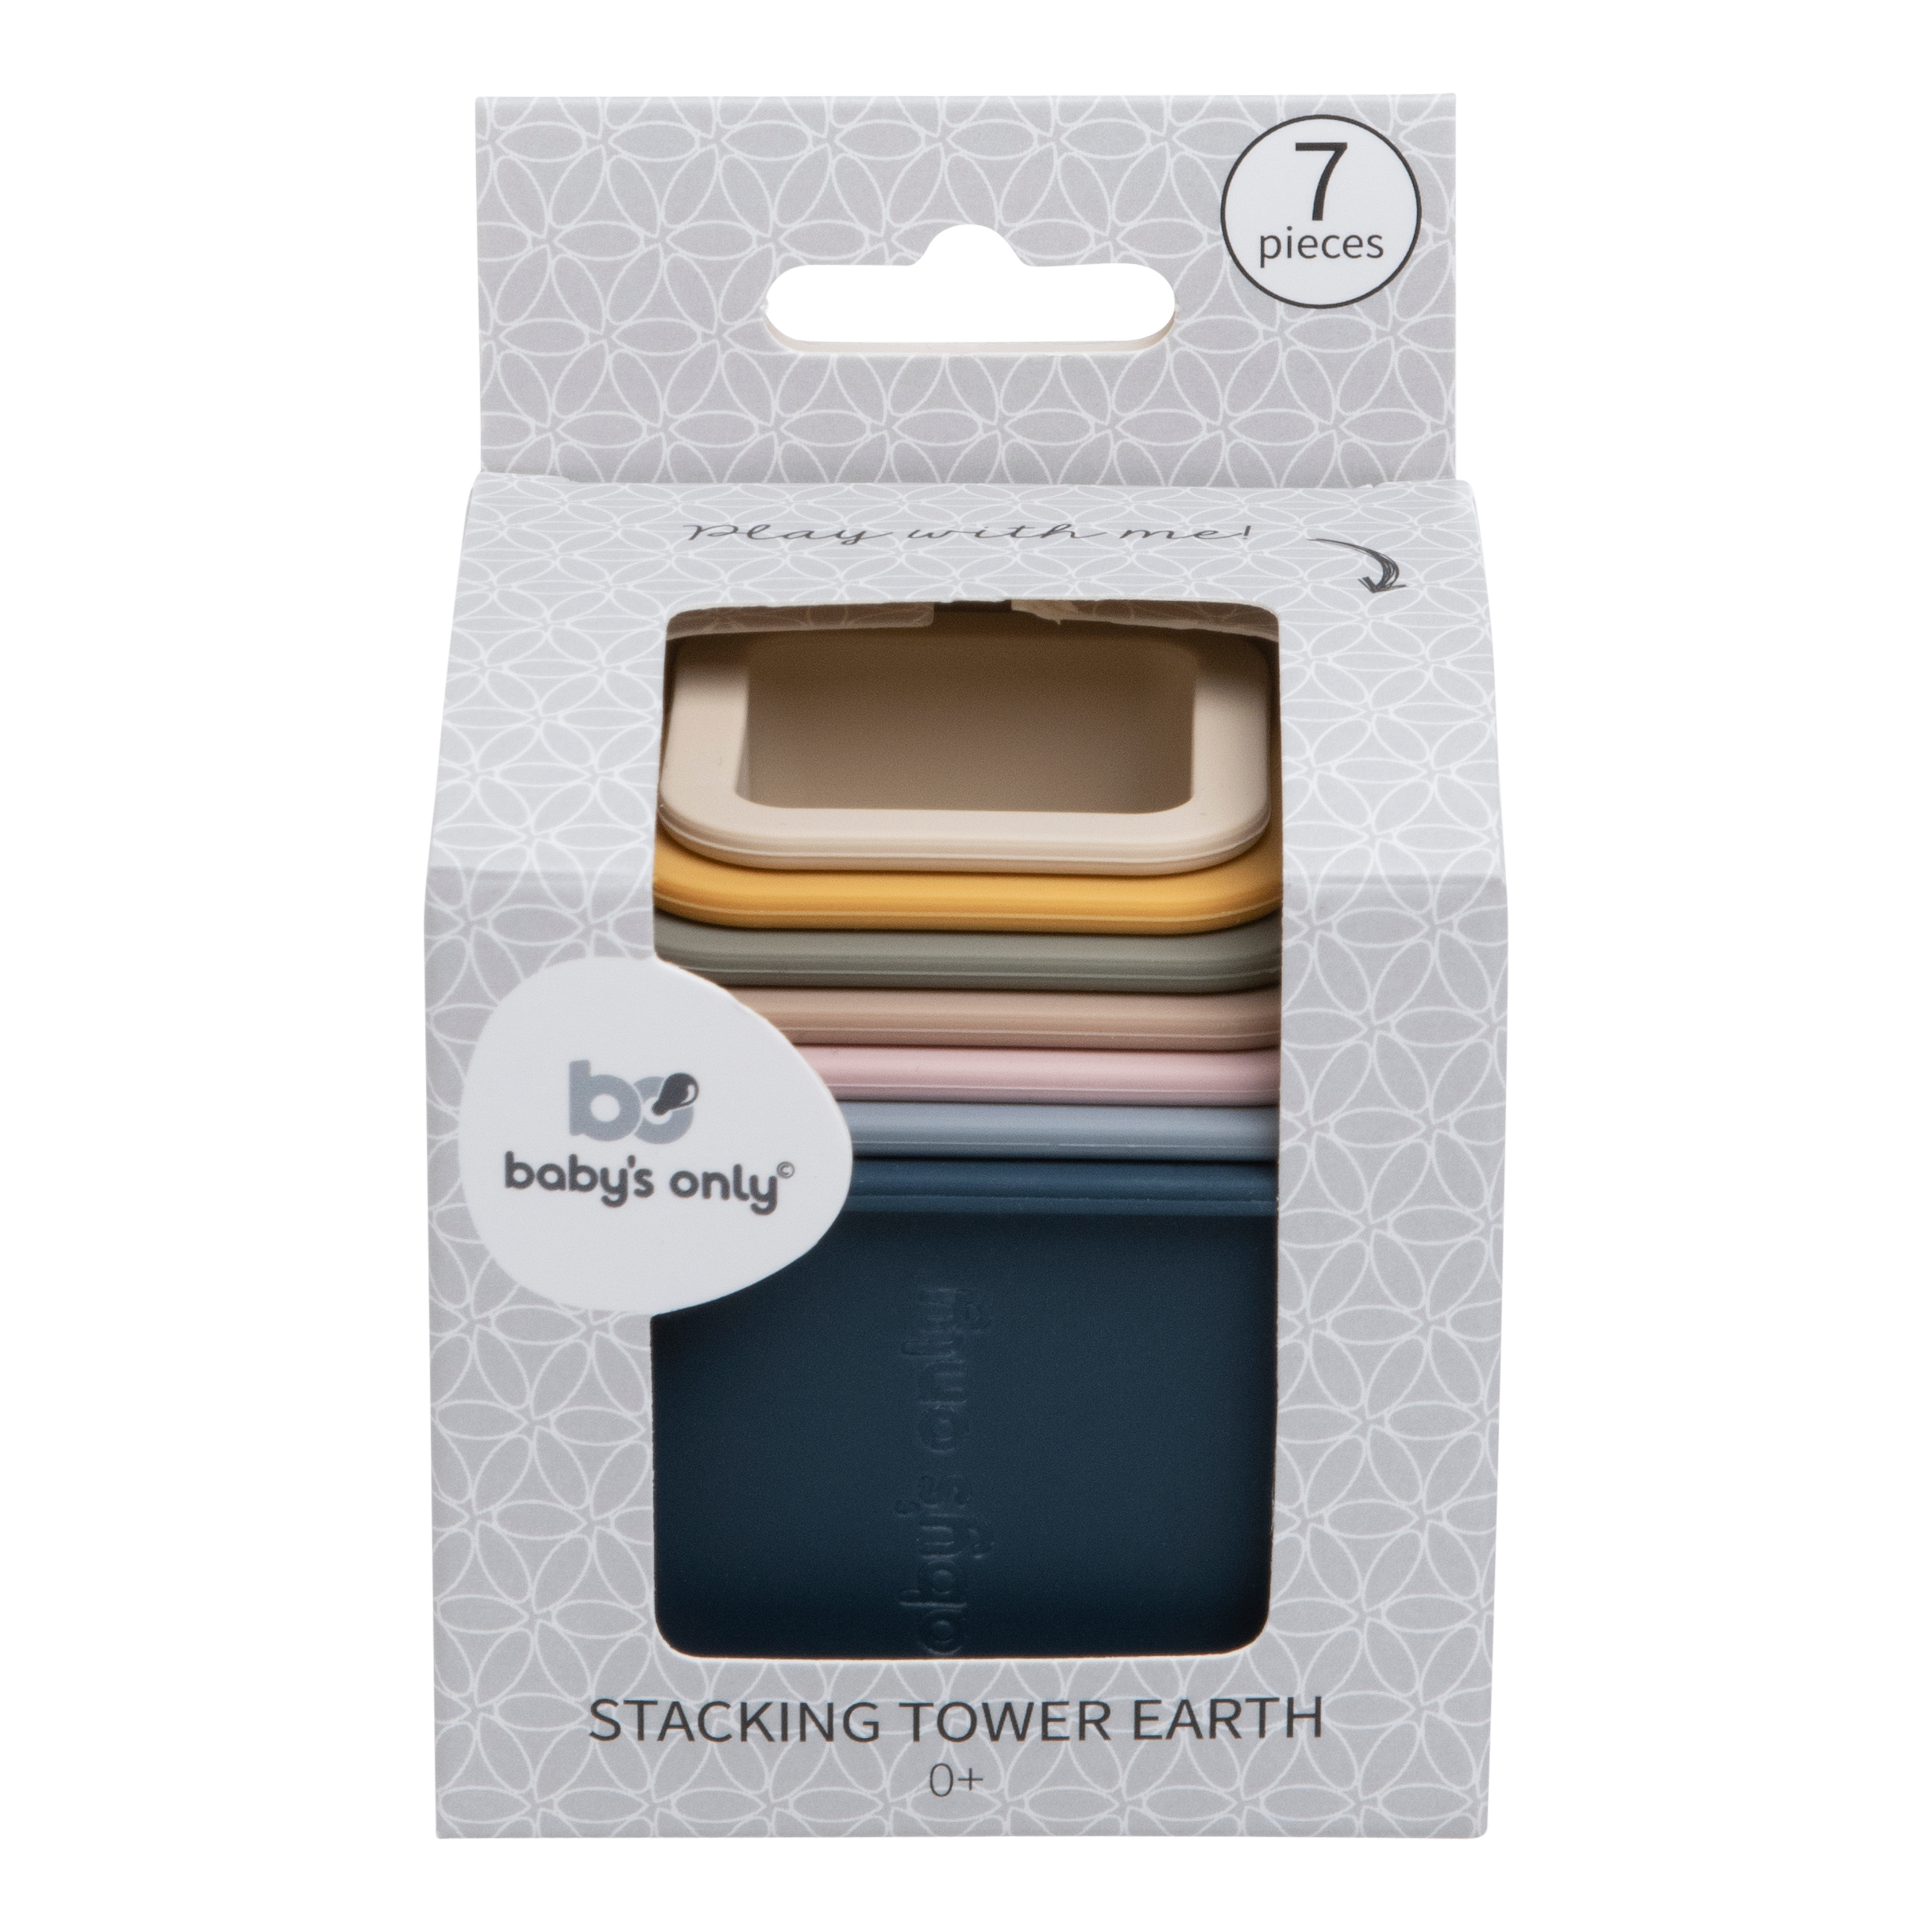 Stacking tower earth mix